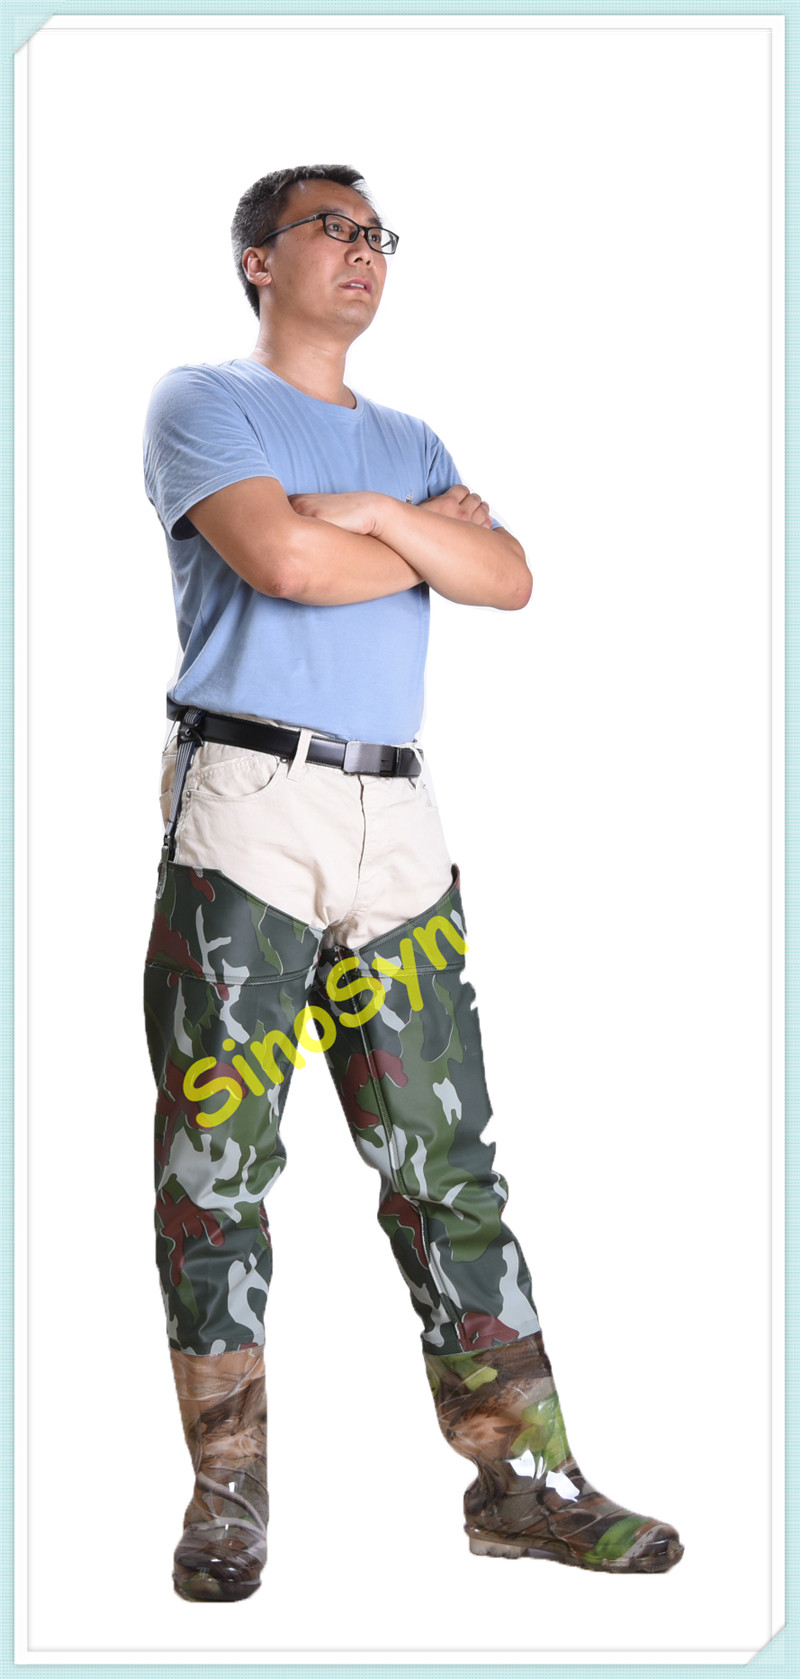 Quality FQT1902 Army-Camouflage PVC Skidproof Underwater Outdoor Fishing Waders with Rain Boots for sale